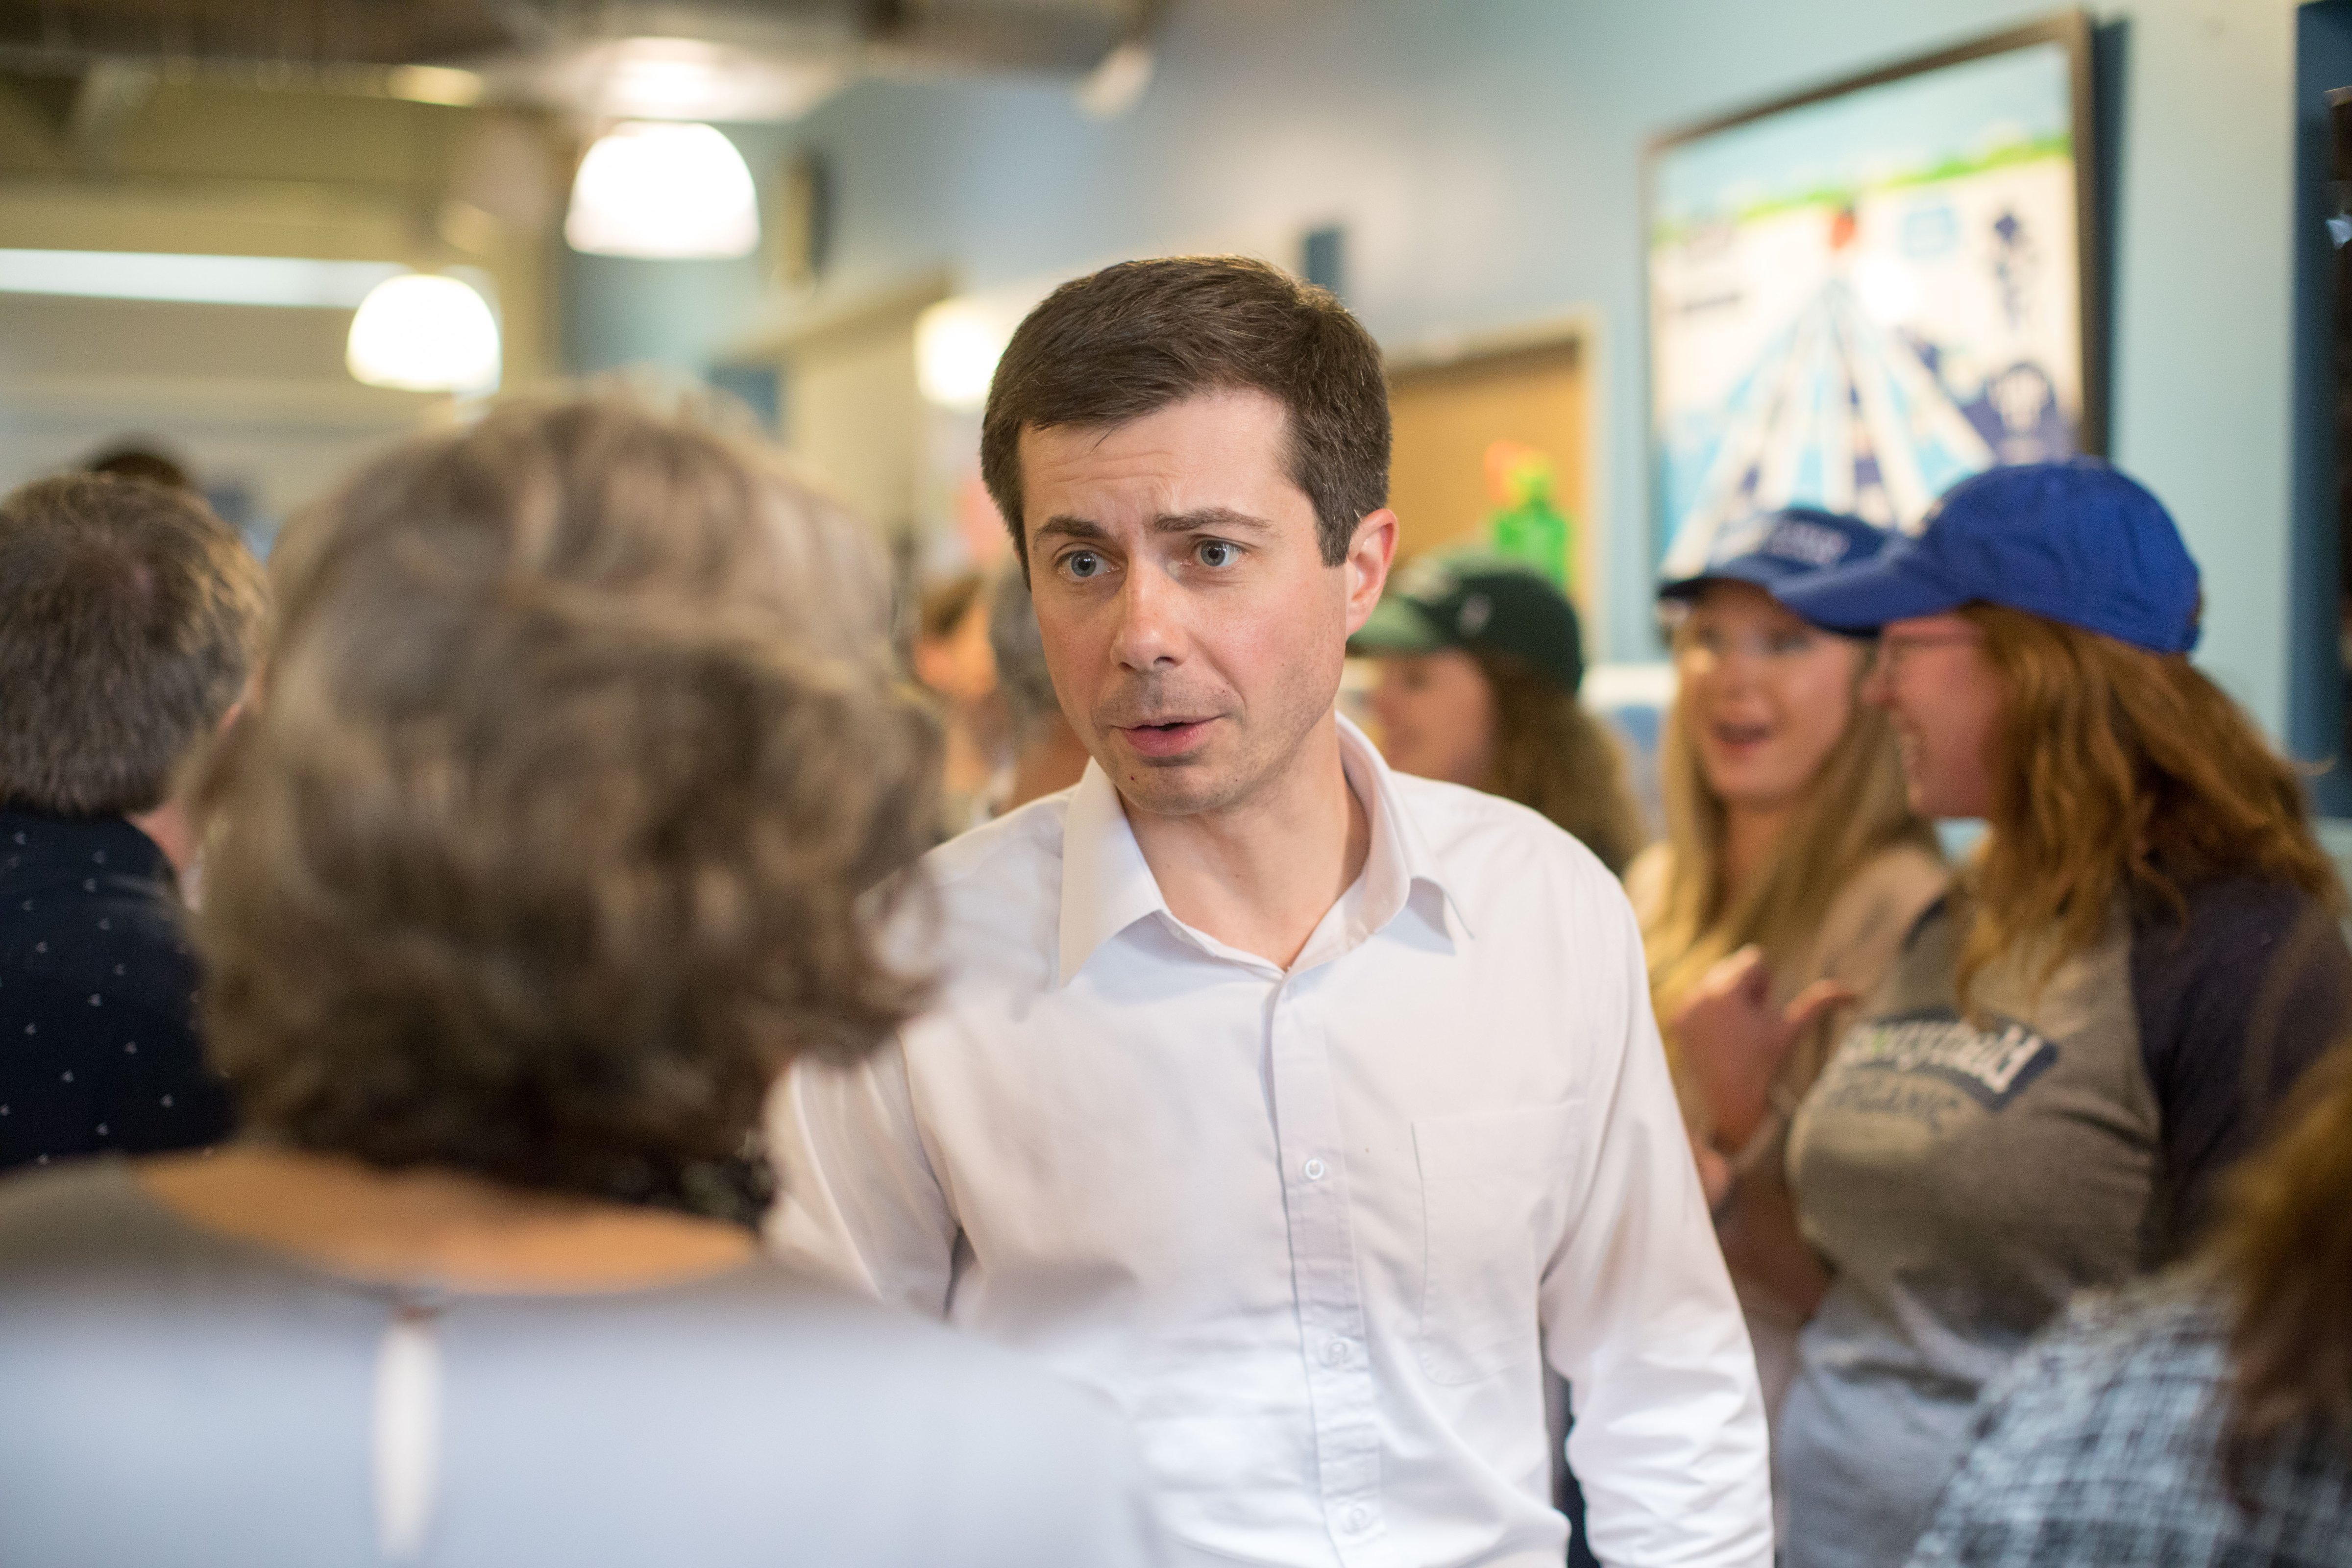 Democratic Presidential candidate, South Bend Mayor Pete Buttigieg speaks with attendees during a campaign stop at Stonyfield Farms on April 19, 2019 in Londonderry, New Hampshire. (Scott Eisen&mdash;Getty Images)